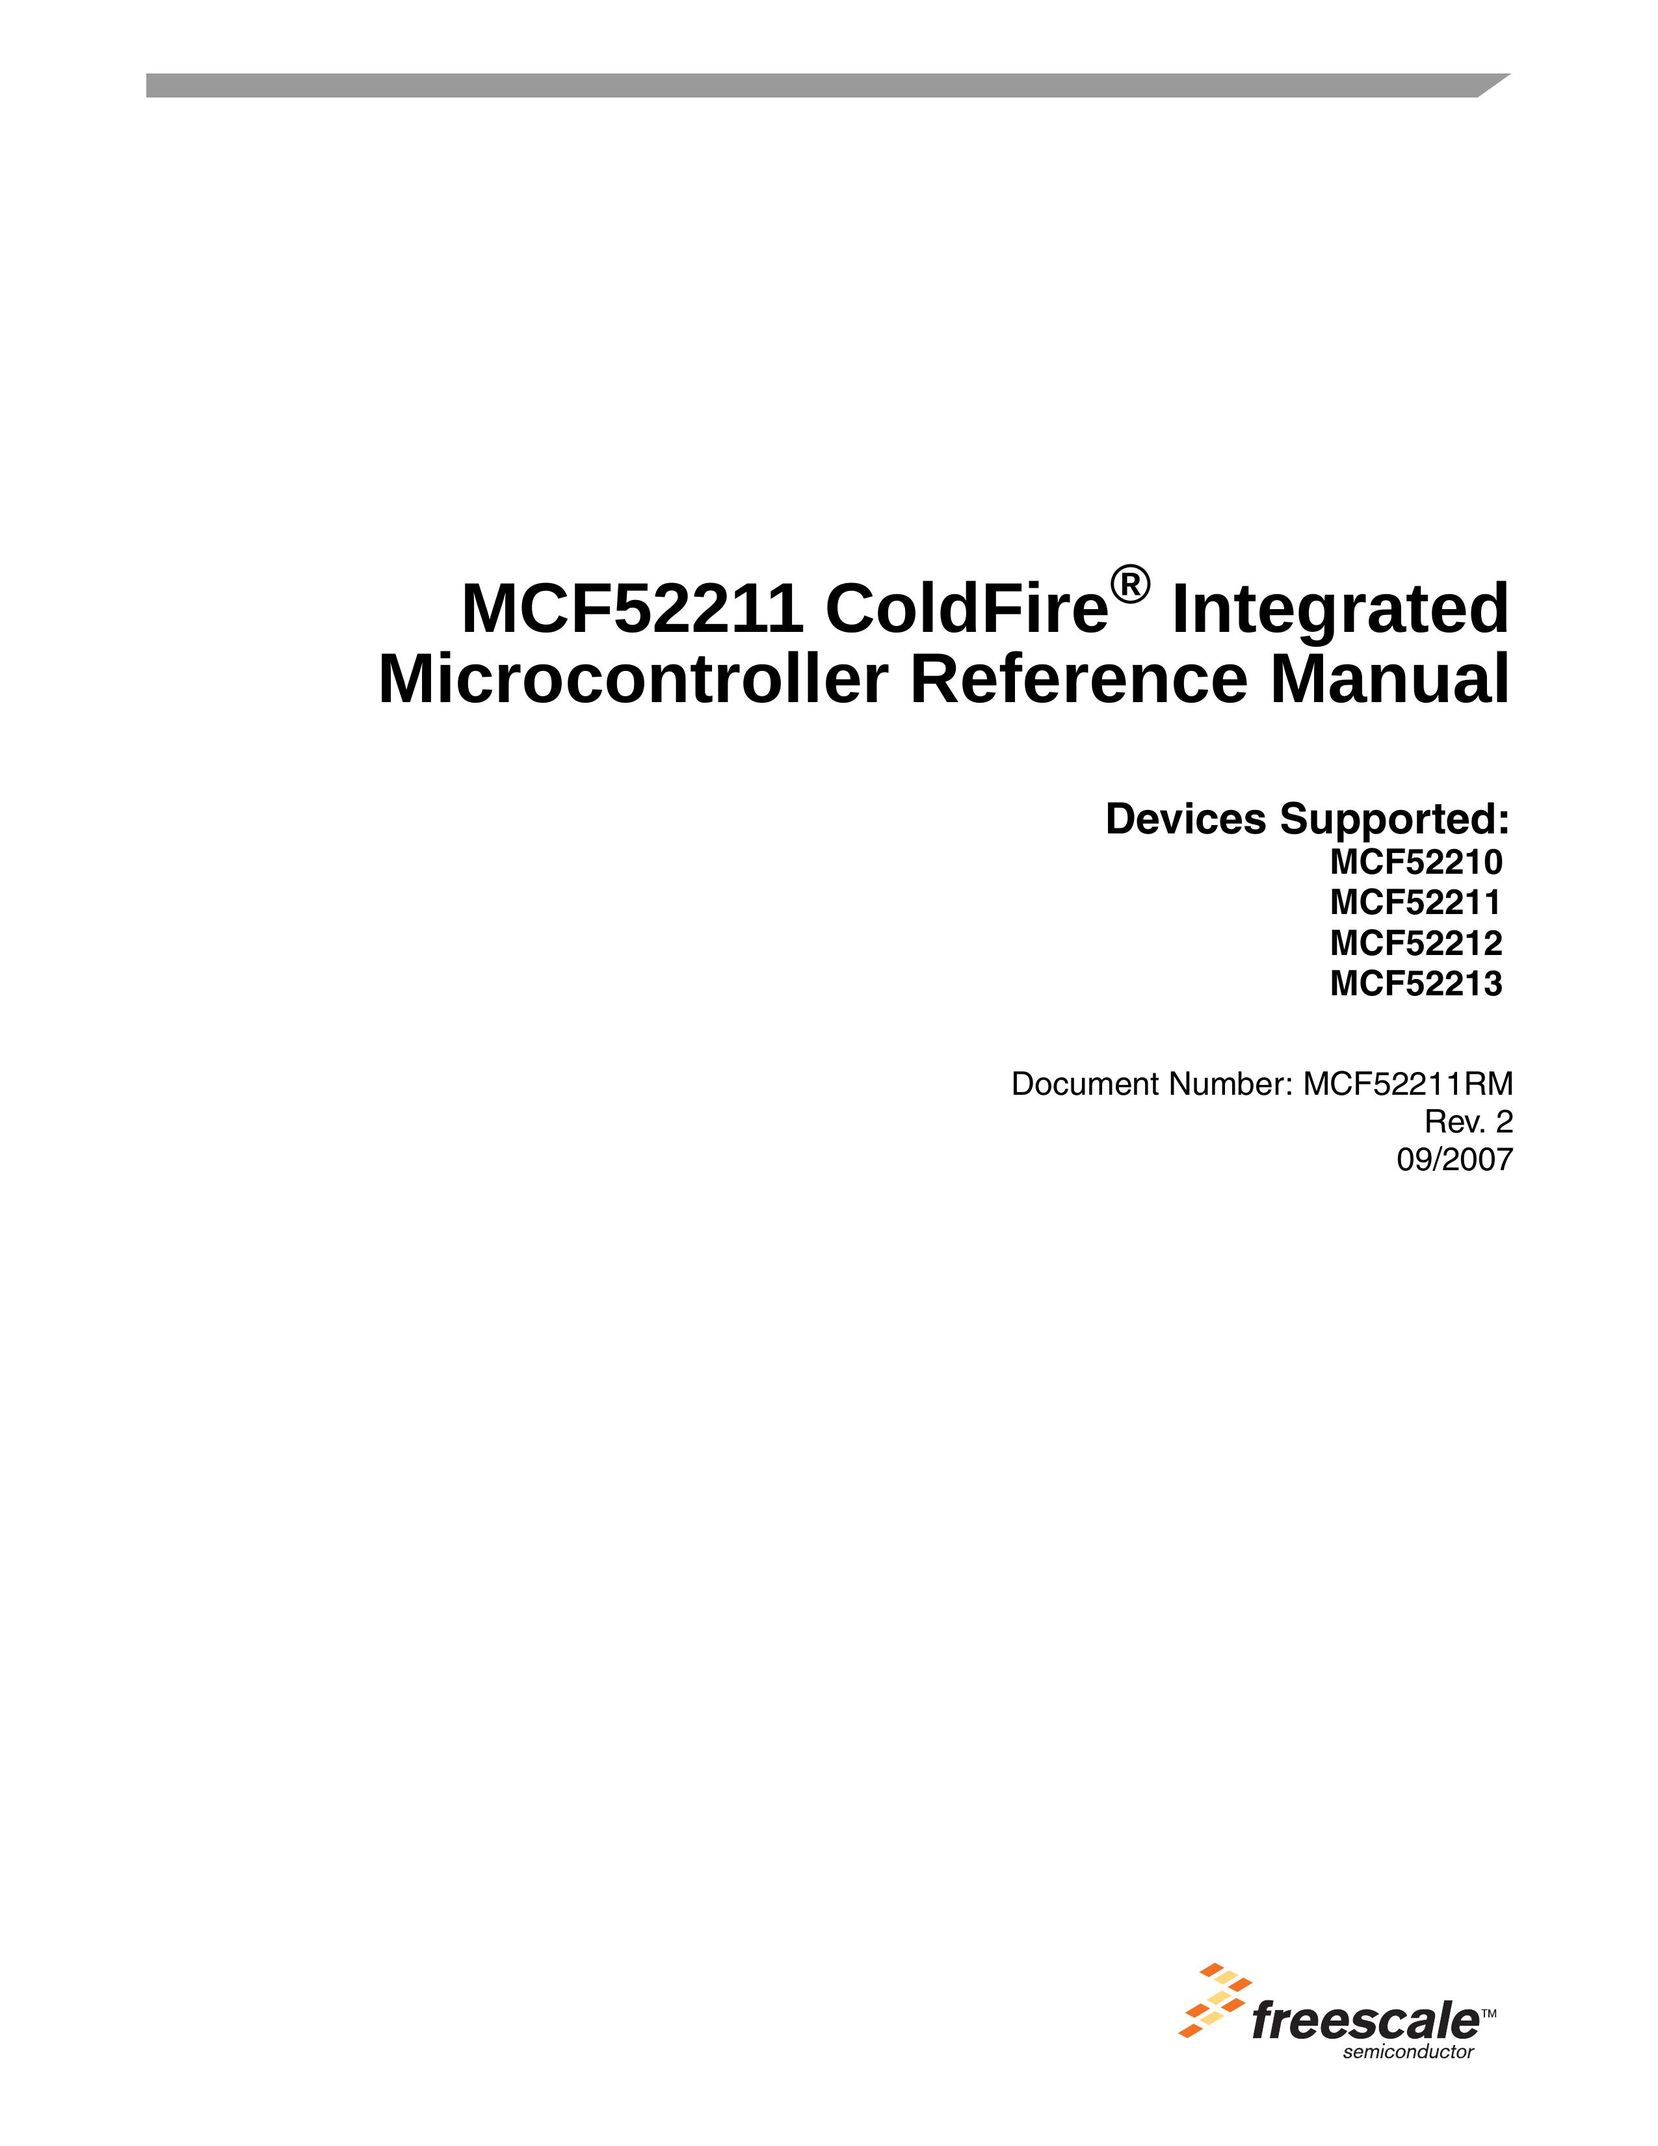 Freescale Semiconductor MCF52212 Network Card User Manual